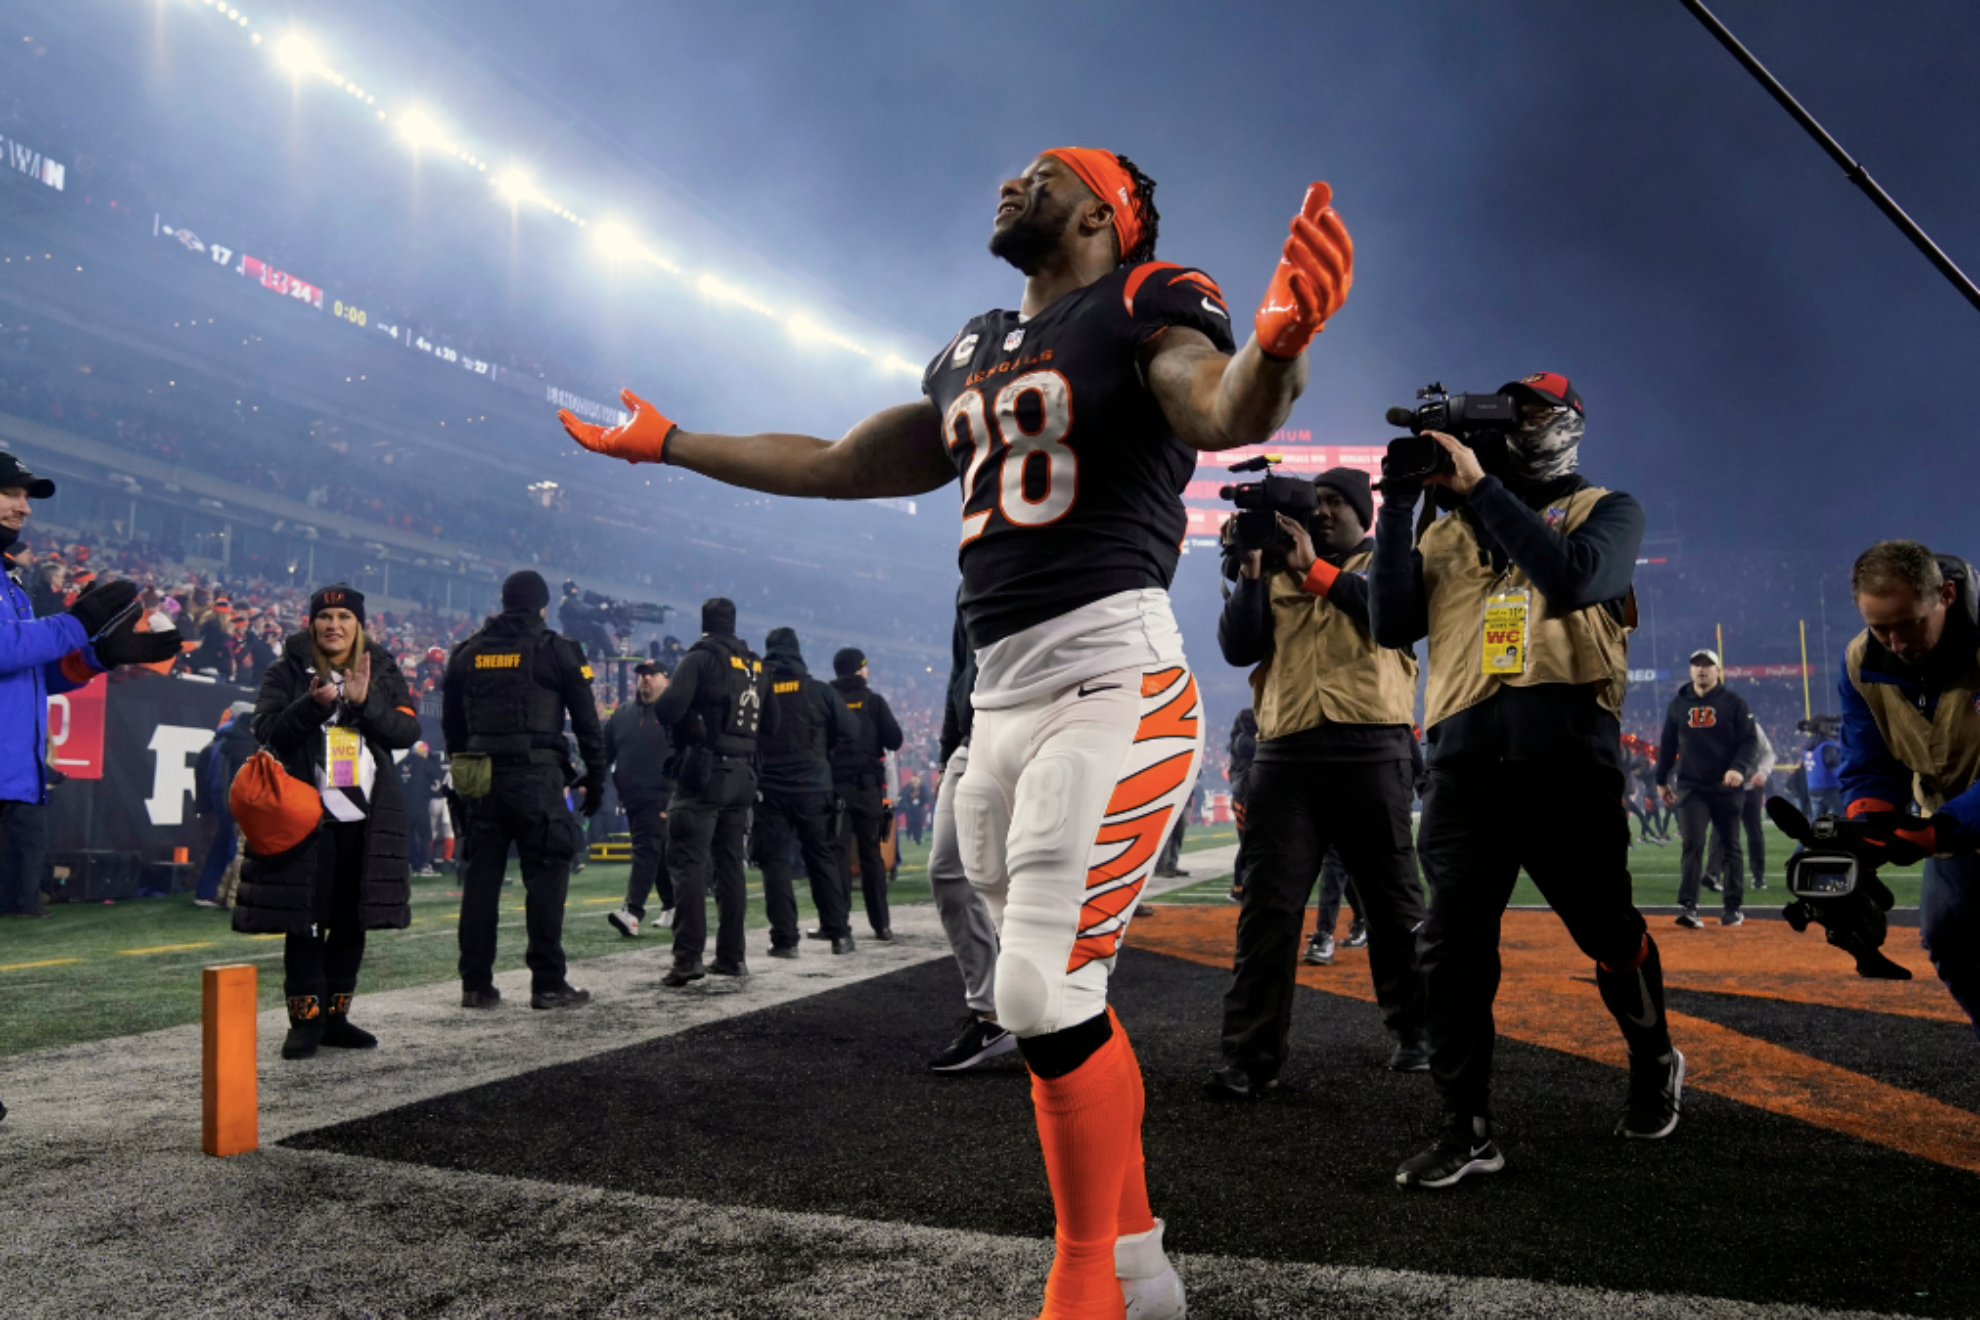 Bengals JaMarr Chases touching gesture to a child with leukemia: this is what its worth to be an idol